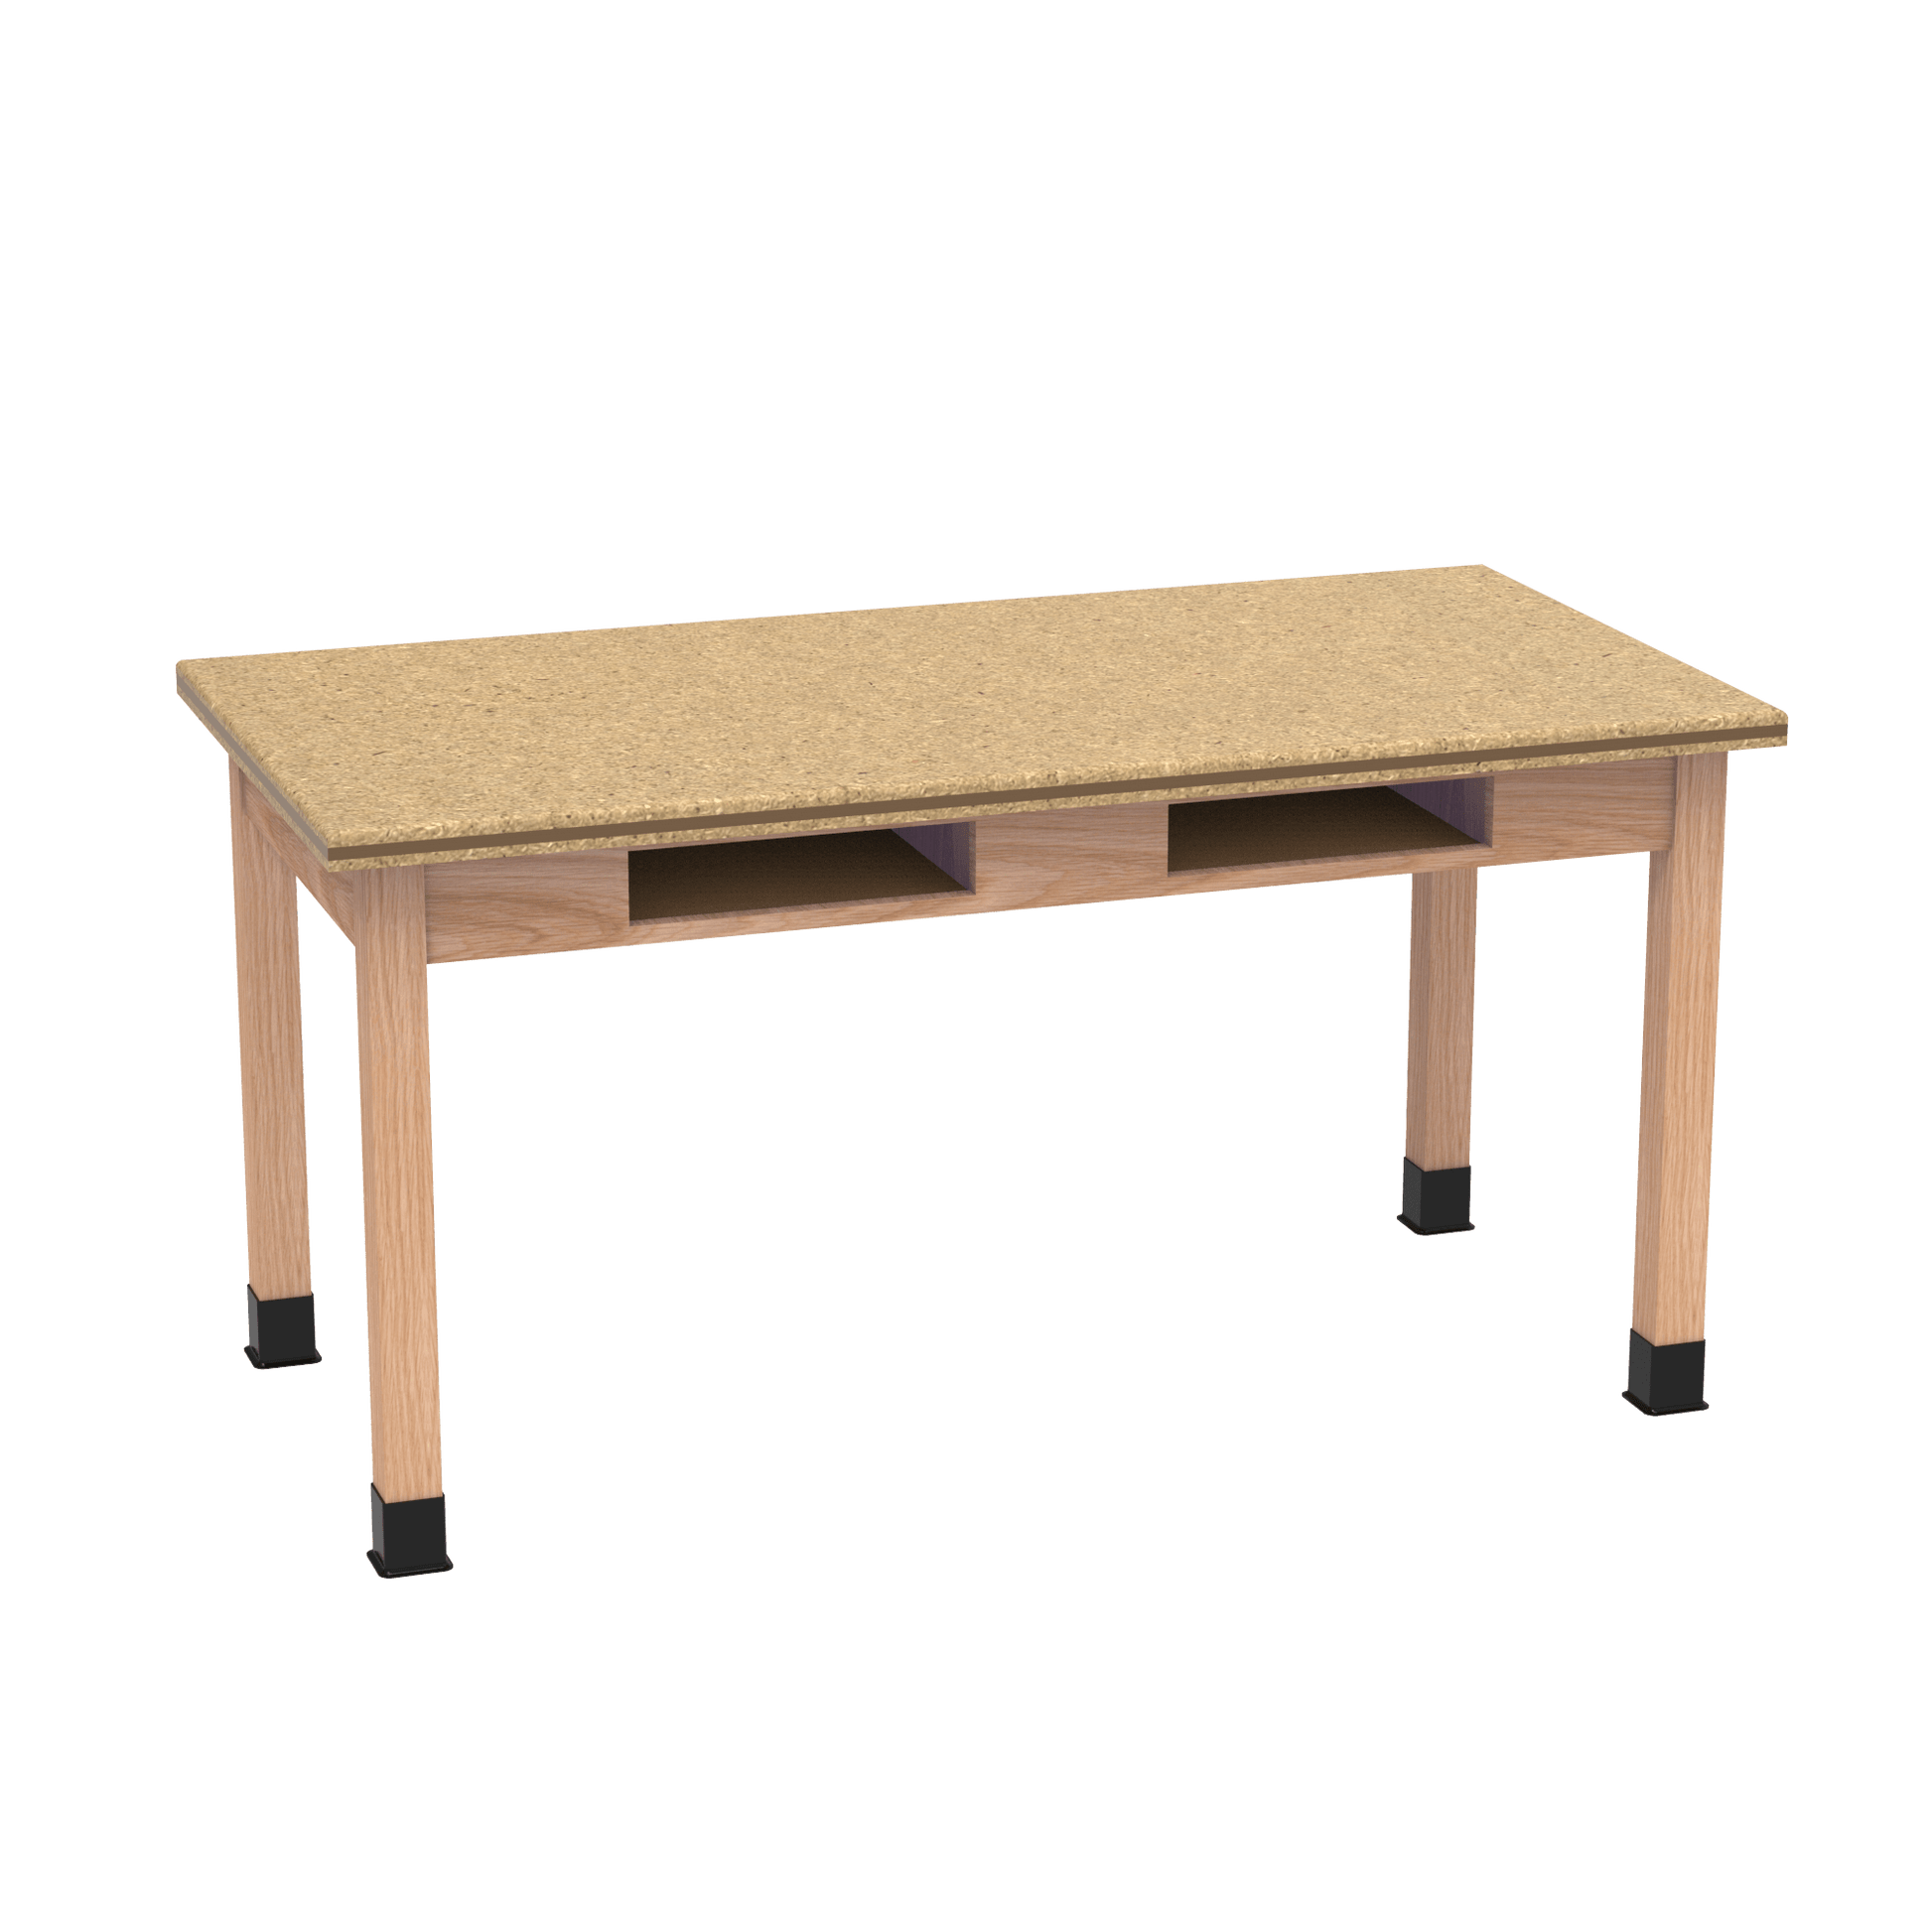 Diversified Woodcrafts Science Table w/ Book Compartment - 54" W x 24" D - Solid Oak Frame and Adjustable Glides - SchoolOutlet